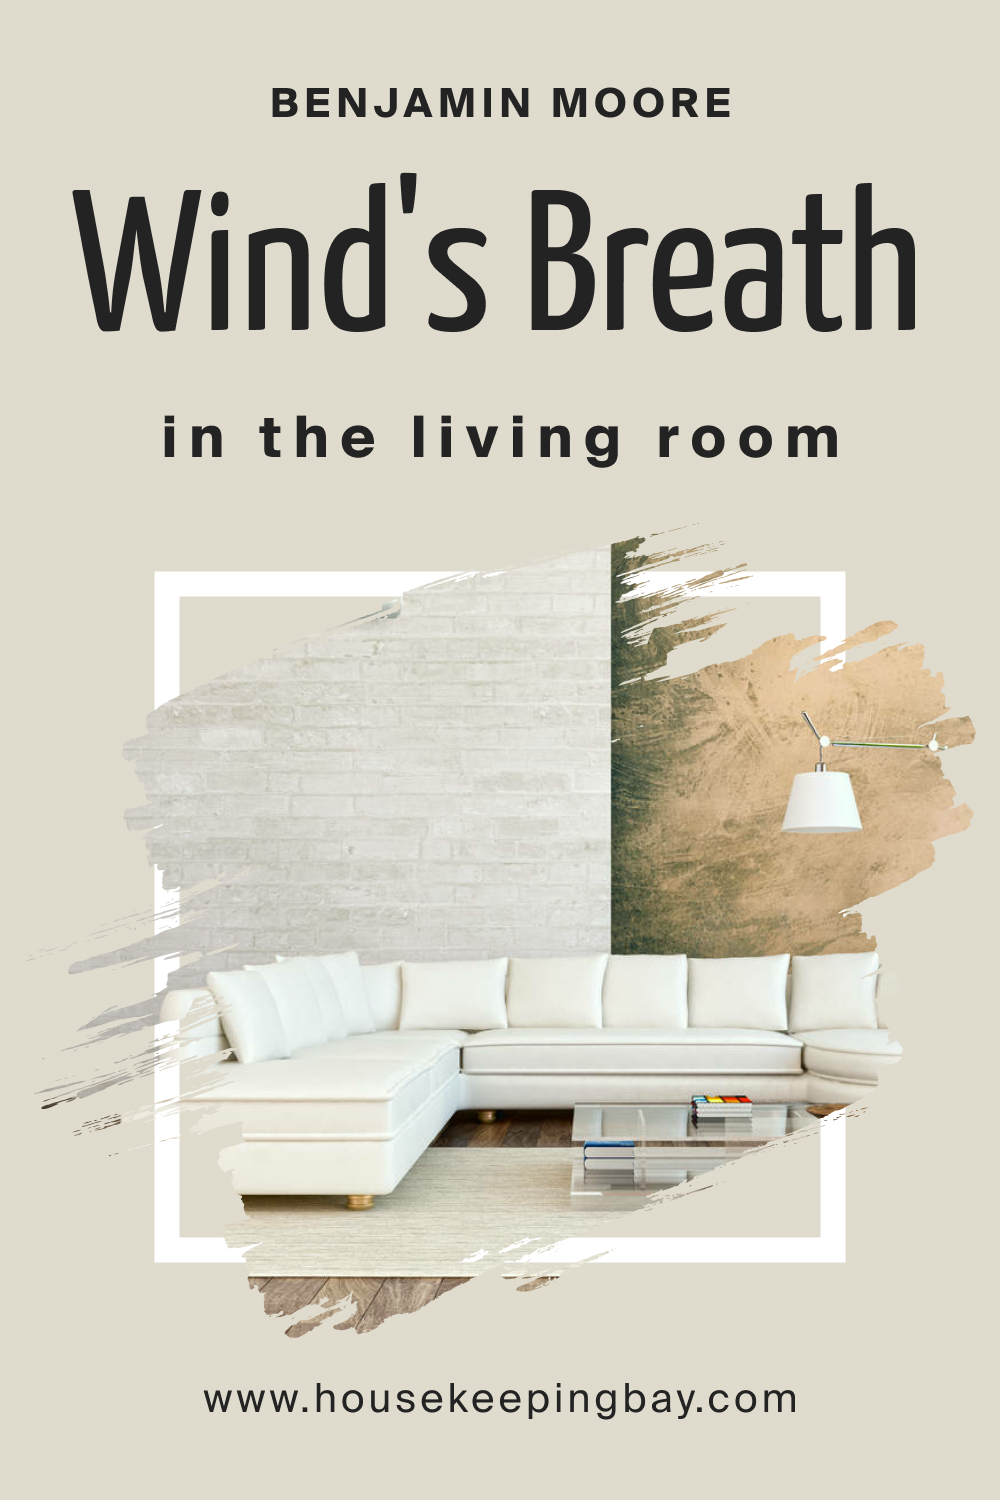 How to Use BM Wind's Breath 981 in the Living Room?